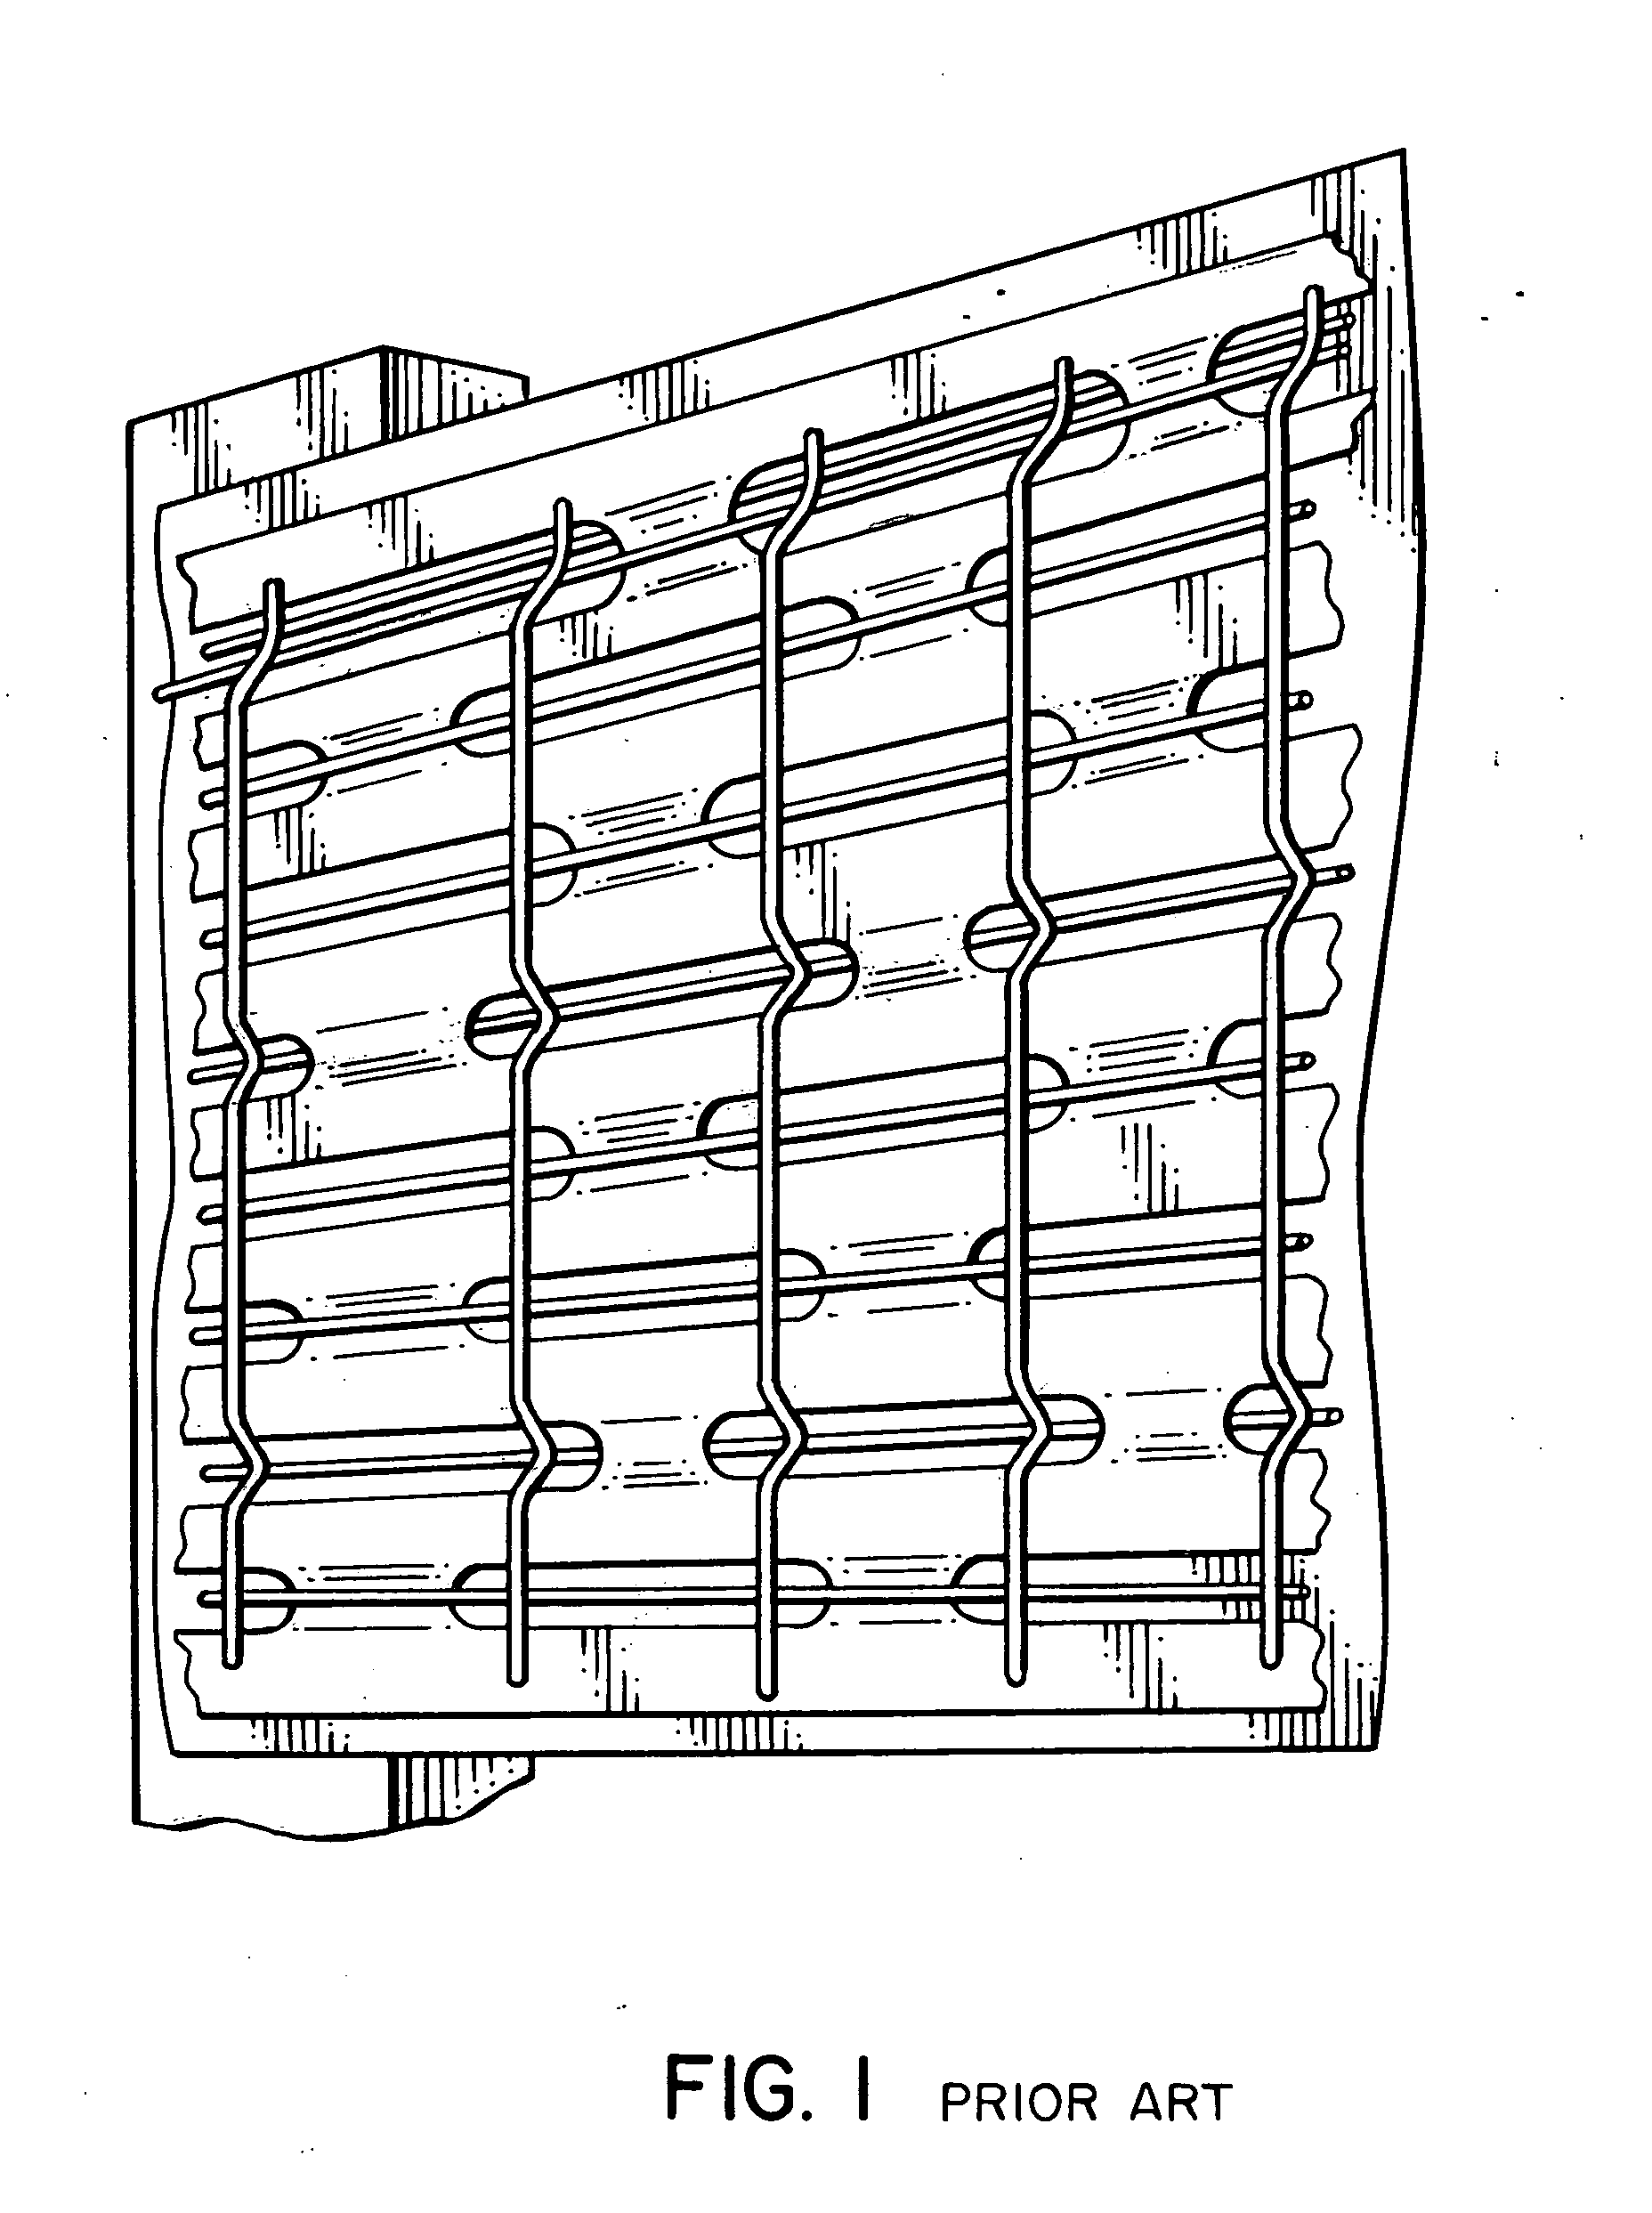 Self-stiffened welded wire lath assembly